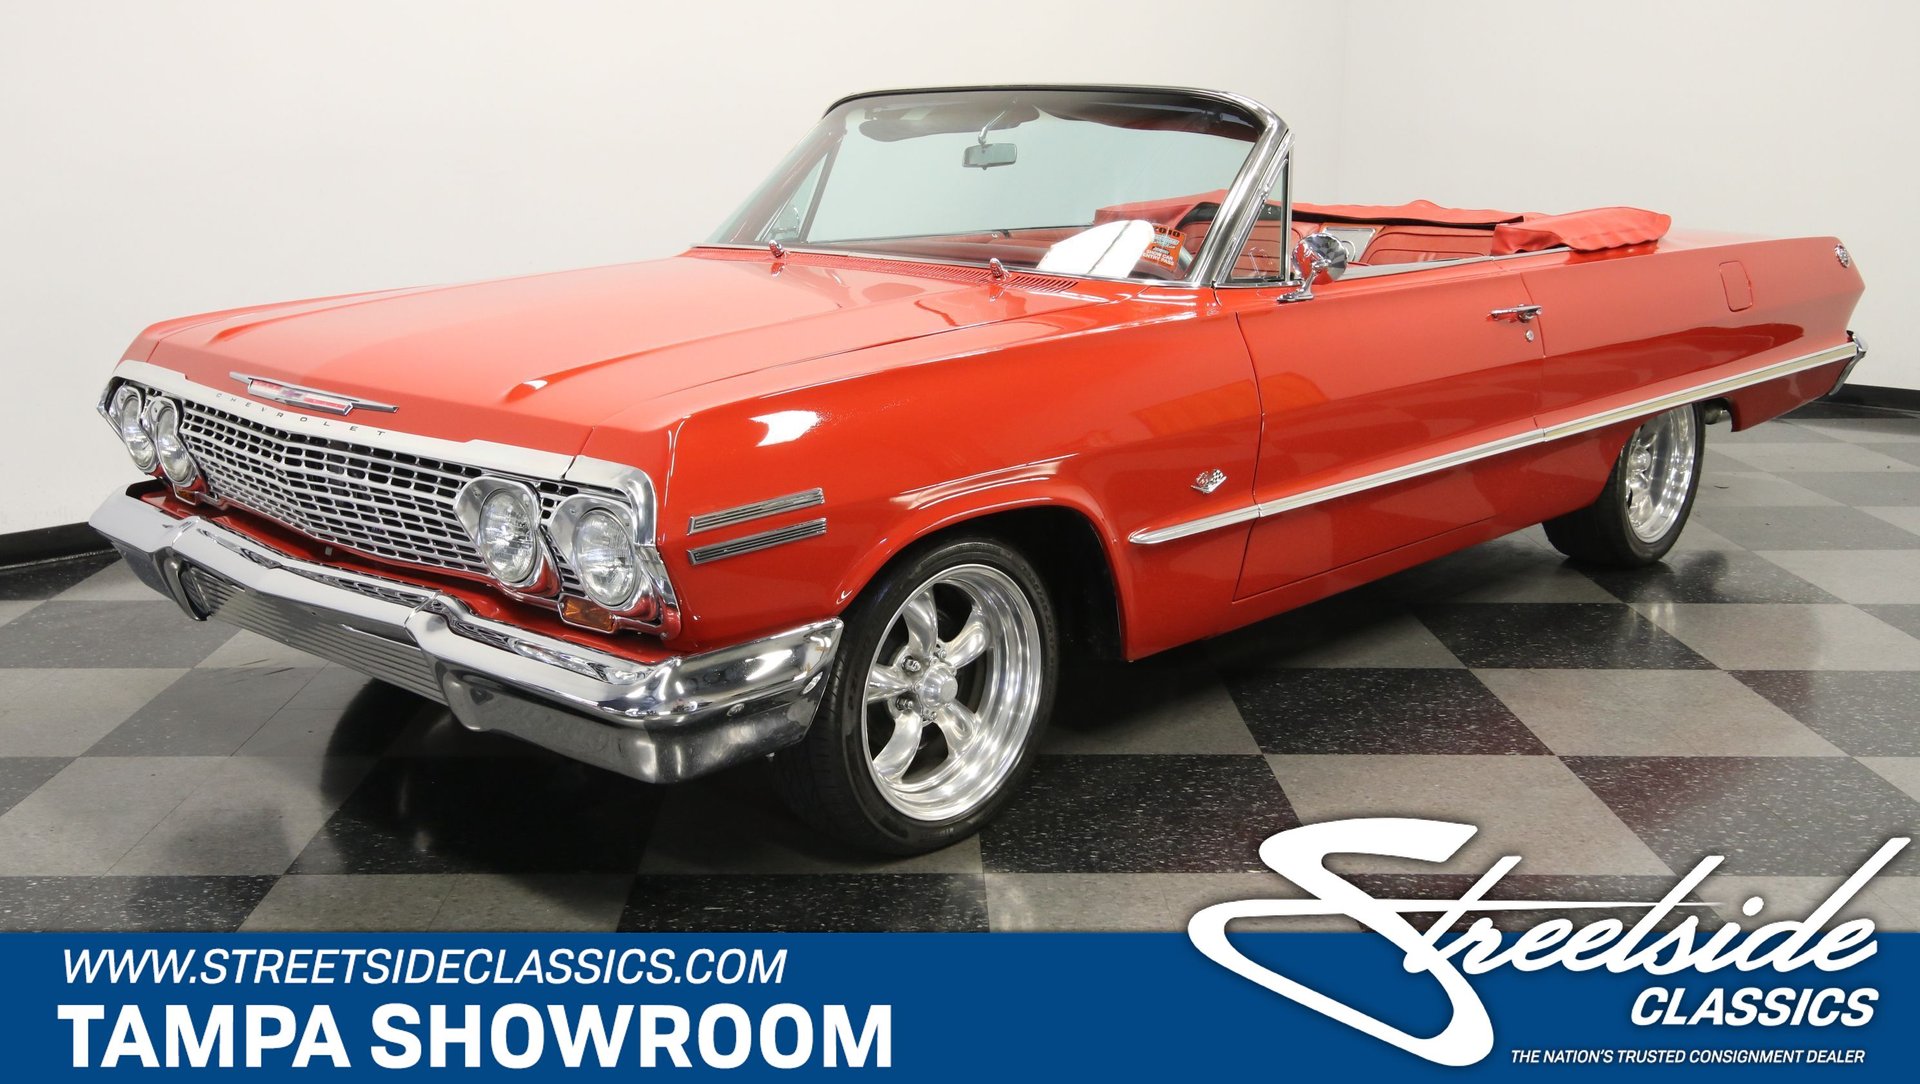 Old Print Red/White 1963 Chevrolet Impala Convertible Esquire Hardtop 